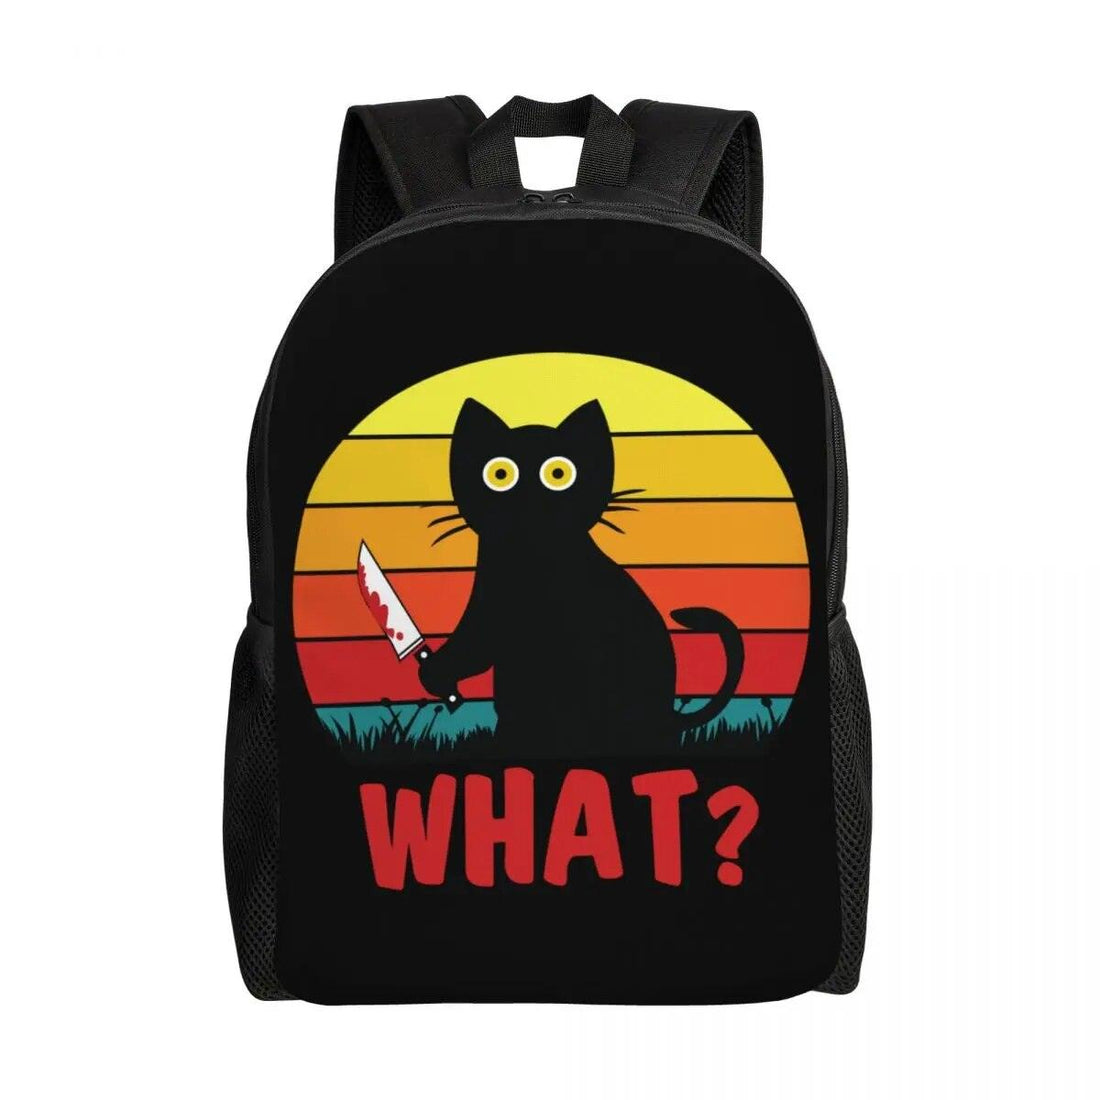 Black Cat With Knif Backpacks, Black, 8 Designs - Just Cats - Gifts for Cat Lovers